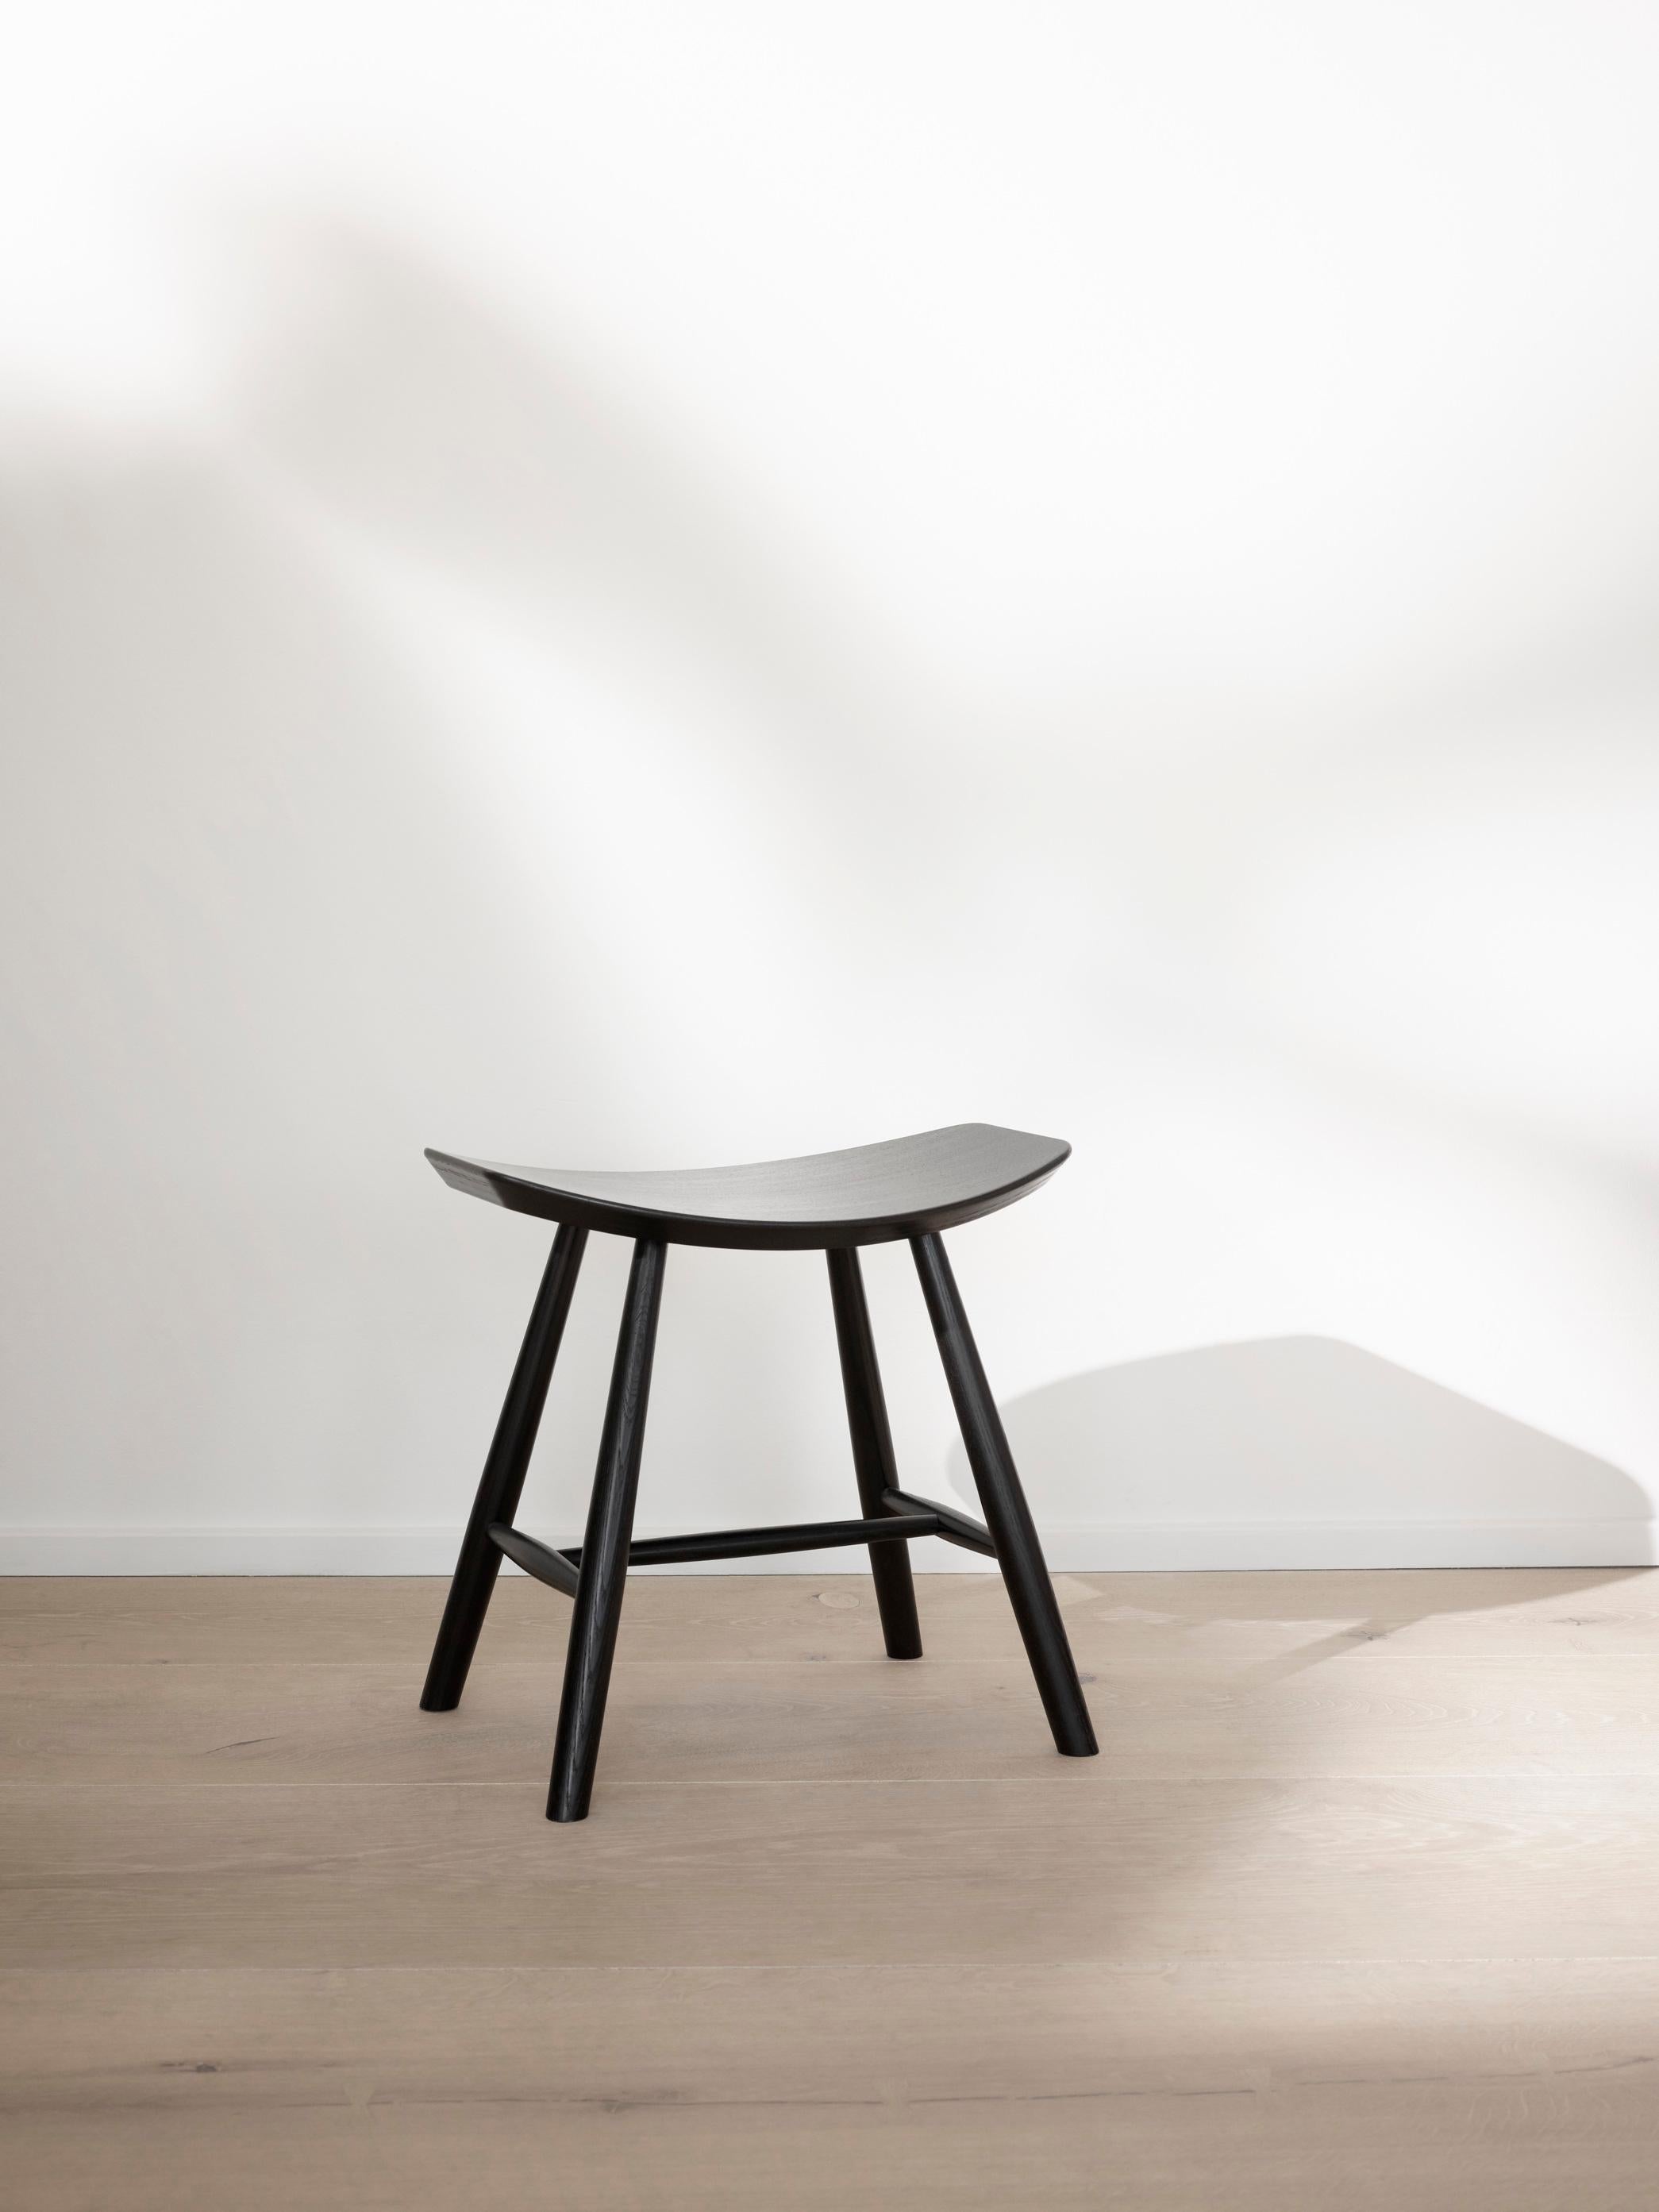 The J63 Stool echoes a similar bare simplicity, with a focus on the functional and the practical. Clearly evident the J63’s curved seat and simple, supportive frame.

It’s the kind of design you would welcome as an occasional seat for guests, a